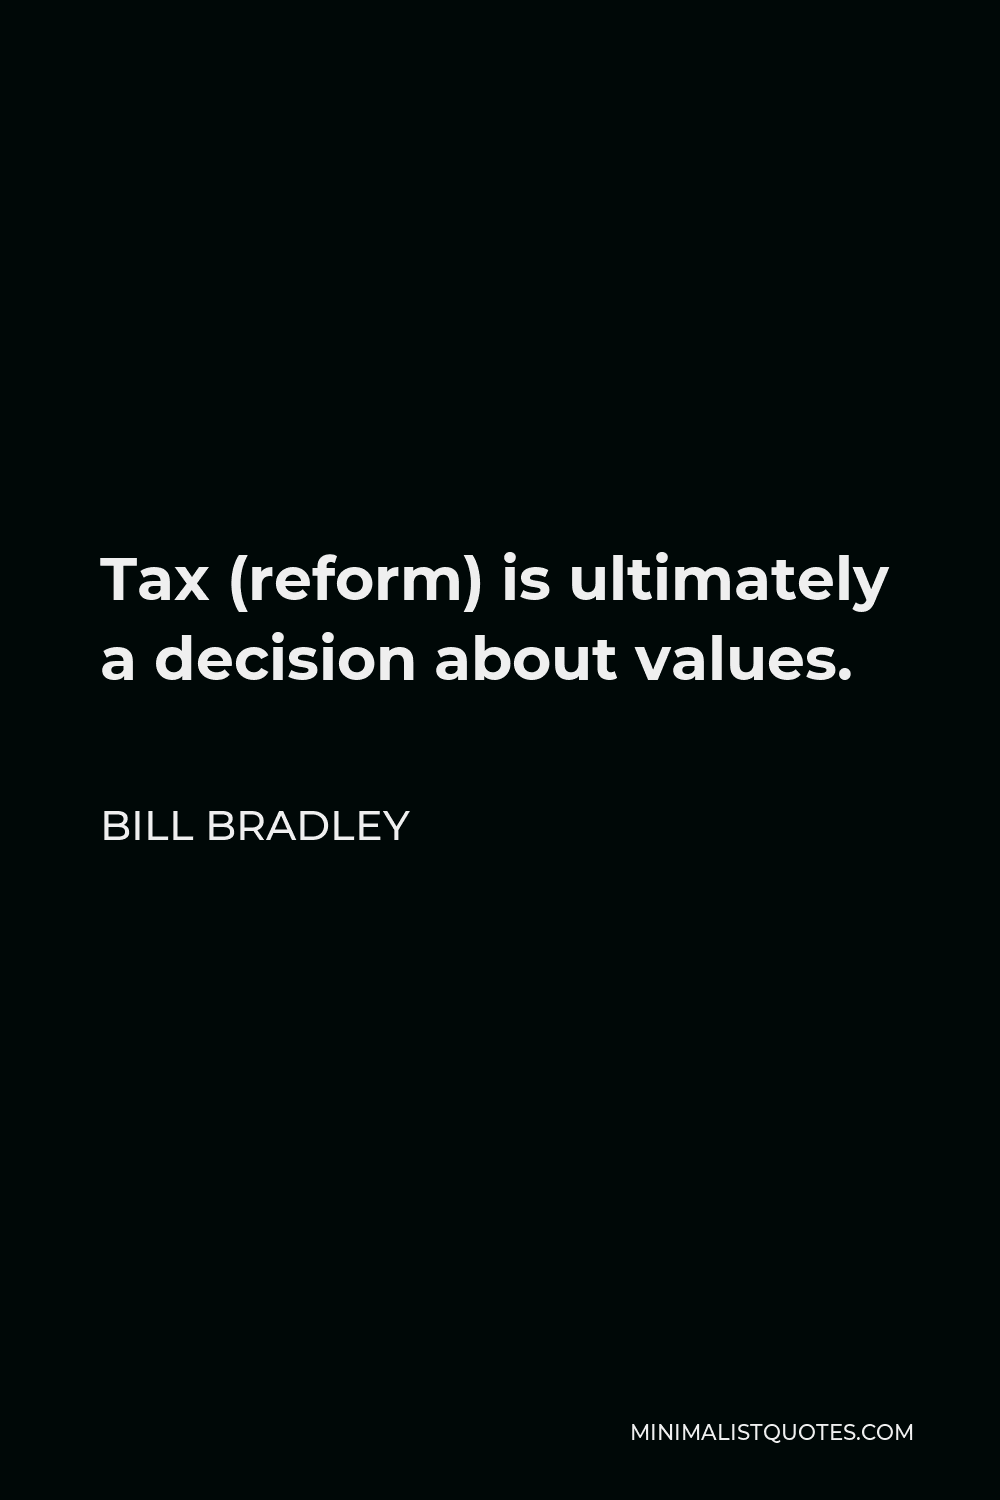 Bill Bradley Quote - Tax (reform) is ultimately a decision about values.